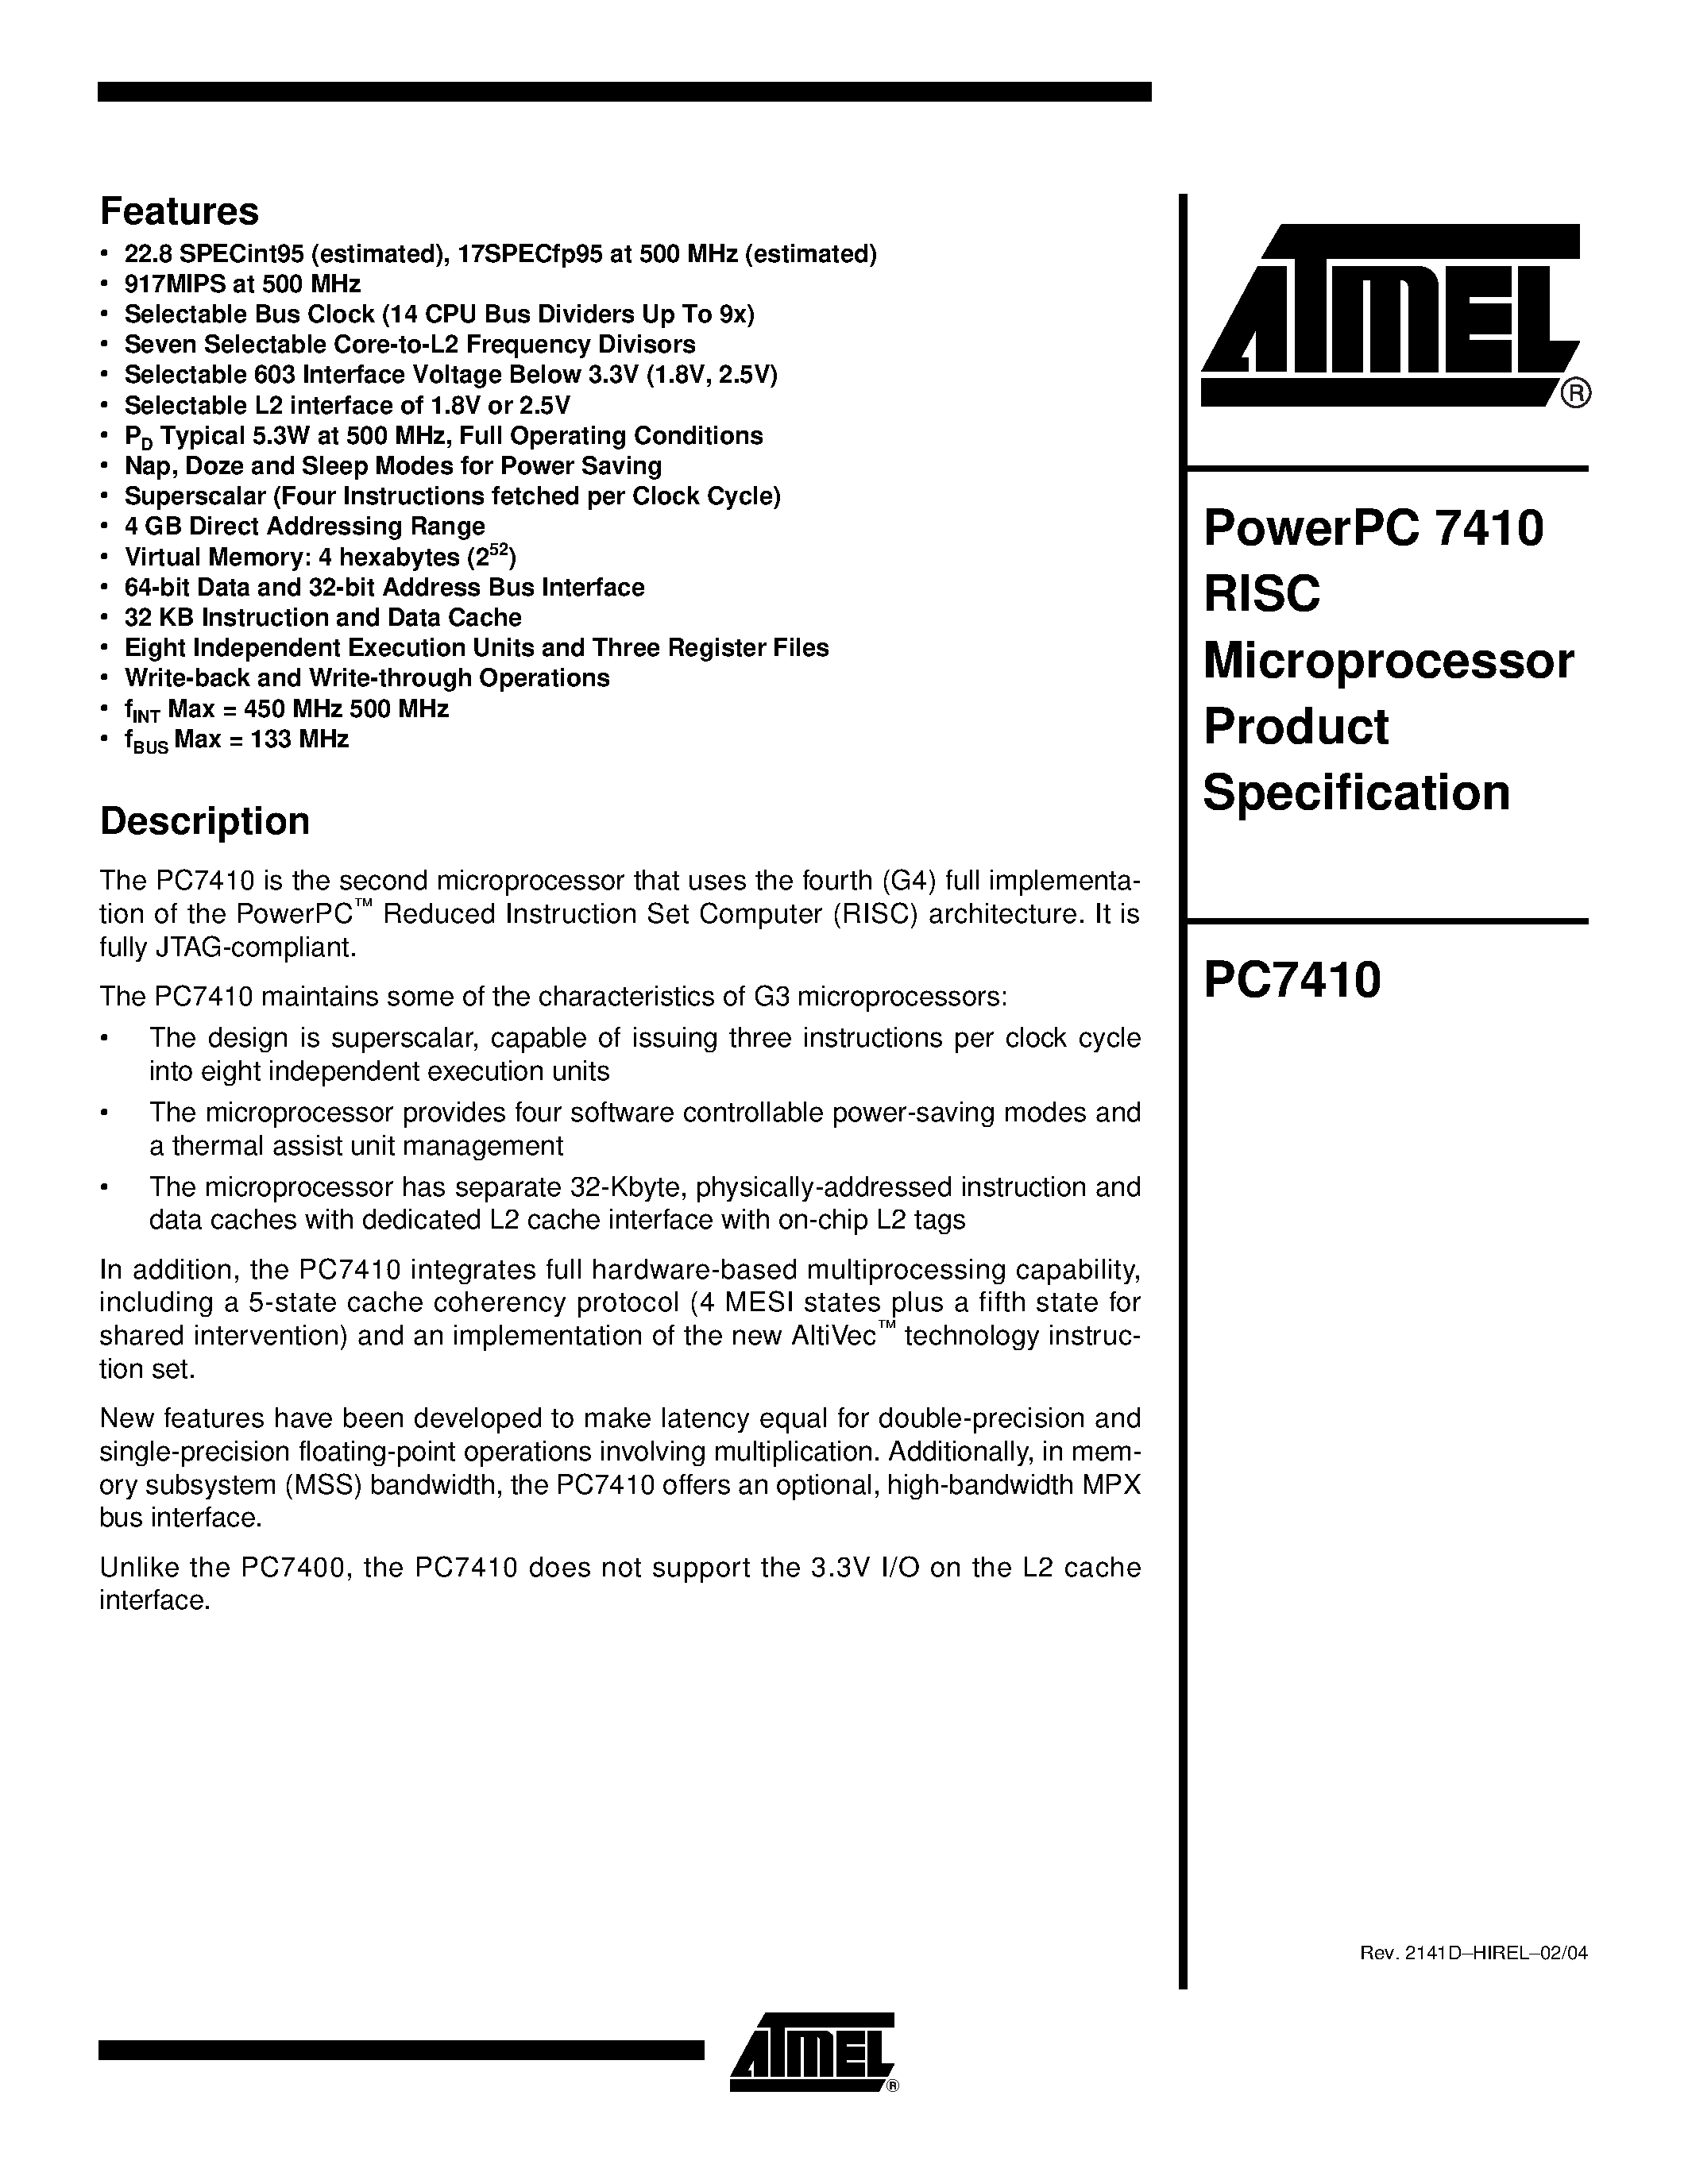 Datasheet PC7410 - PowerPC 7410 RISC Microprocessor Product Specification page 1